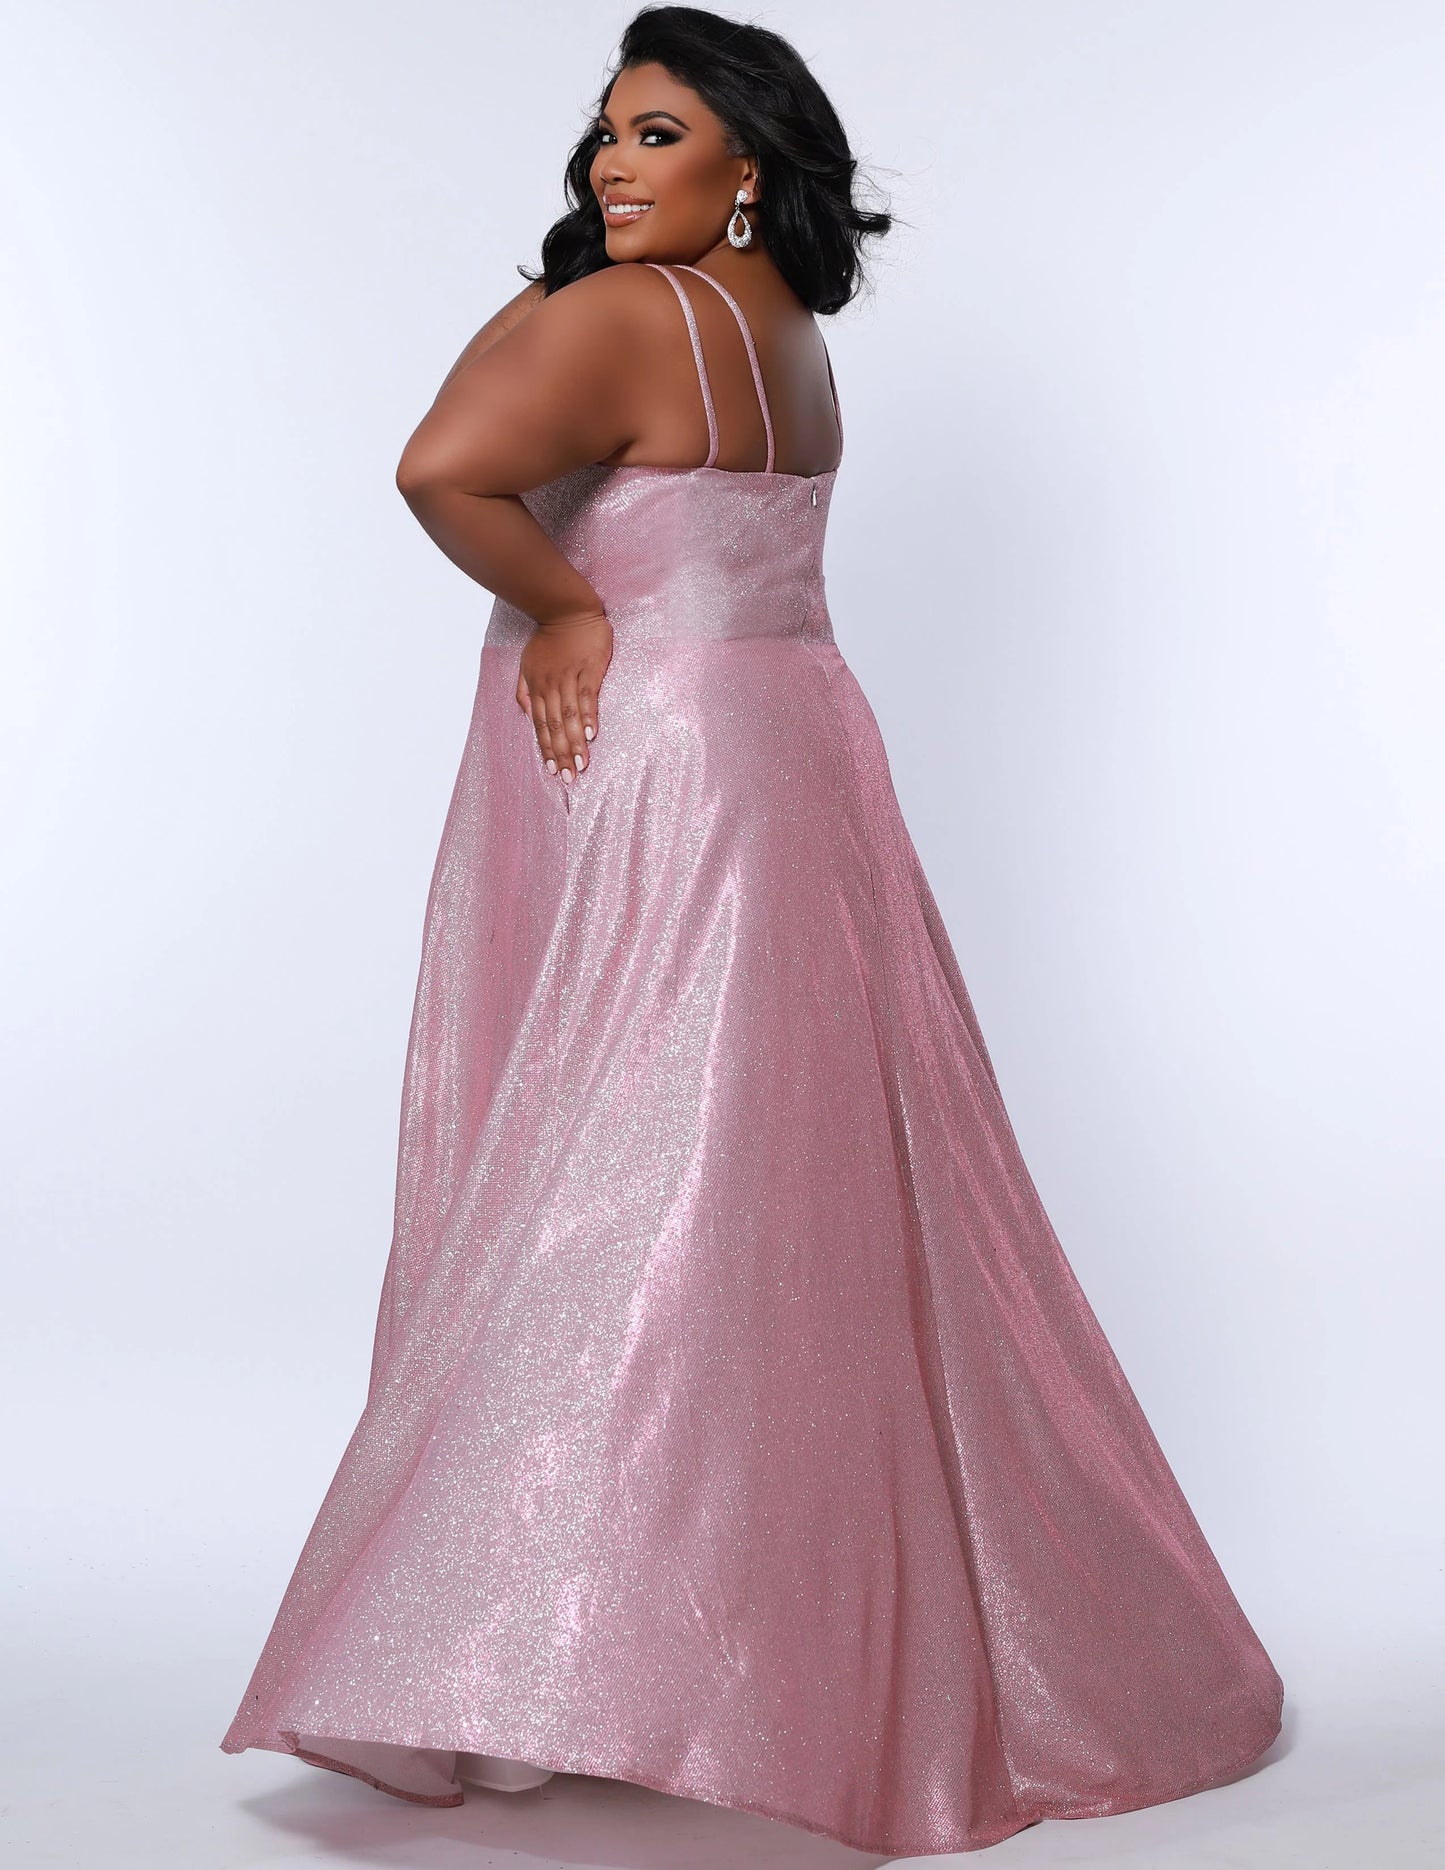 This plus-sized prom dress from Sydney's Closet SC7349 is made of shimmering knit and features an A-line silhouette, scoop neckline, double straps, zip-up back, natural waist, A-line skirt with slit, and hidden pockets. Fully lined for a comfortable and flattering fit. Perfect for special occasions. Keep it sweet and sparkly when you wear our classic A-line plus size prom dress! 